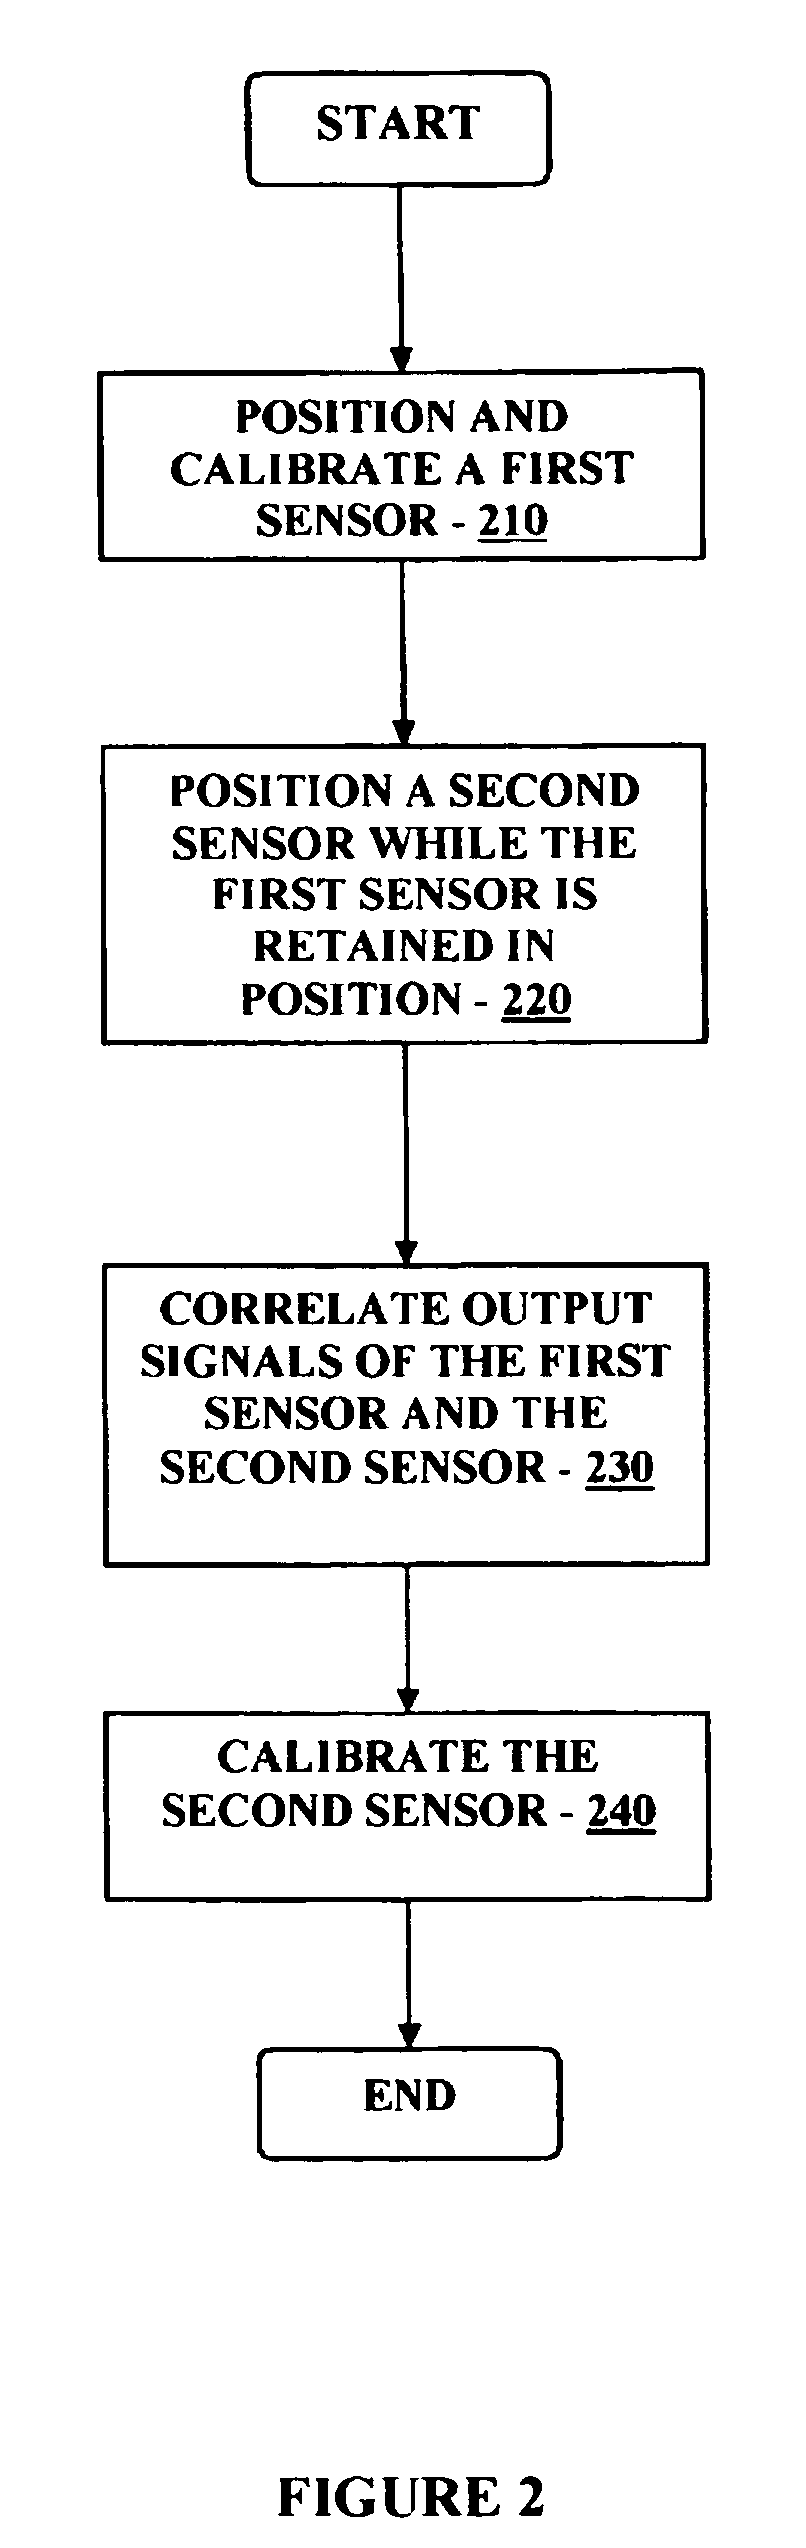 Method and system for providing continuous calibration of implantable analyte sensors